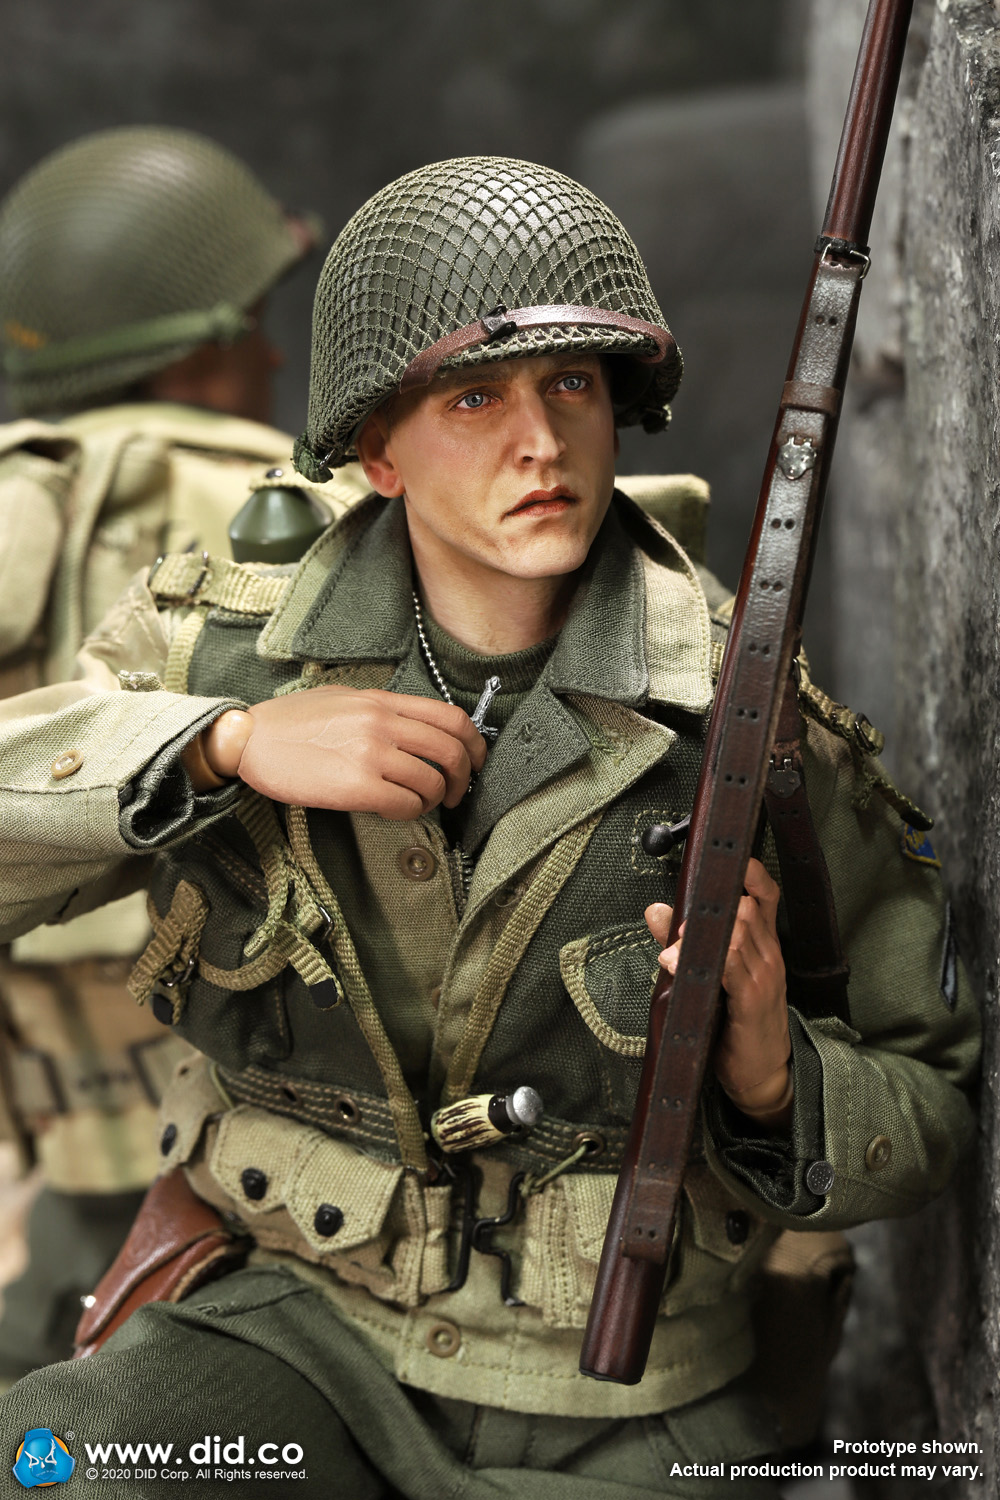 movie-based - NEW PRODUCT: DiD: A80144 WWII US 2nd Ranger Battalion Series 4 Private Jackson 3721